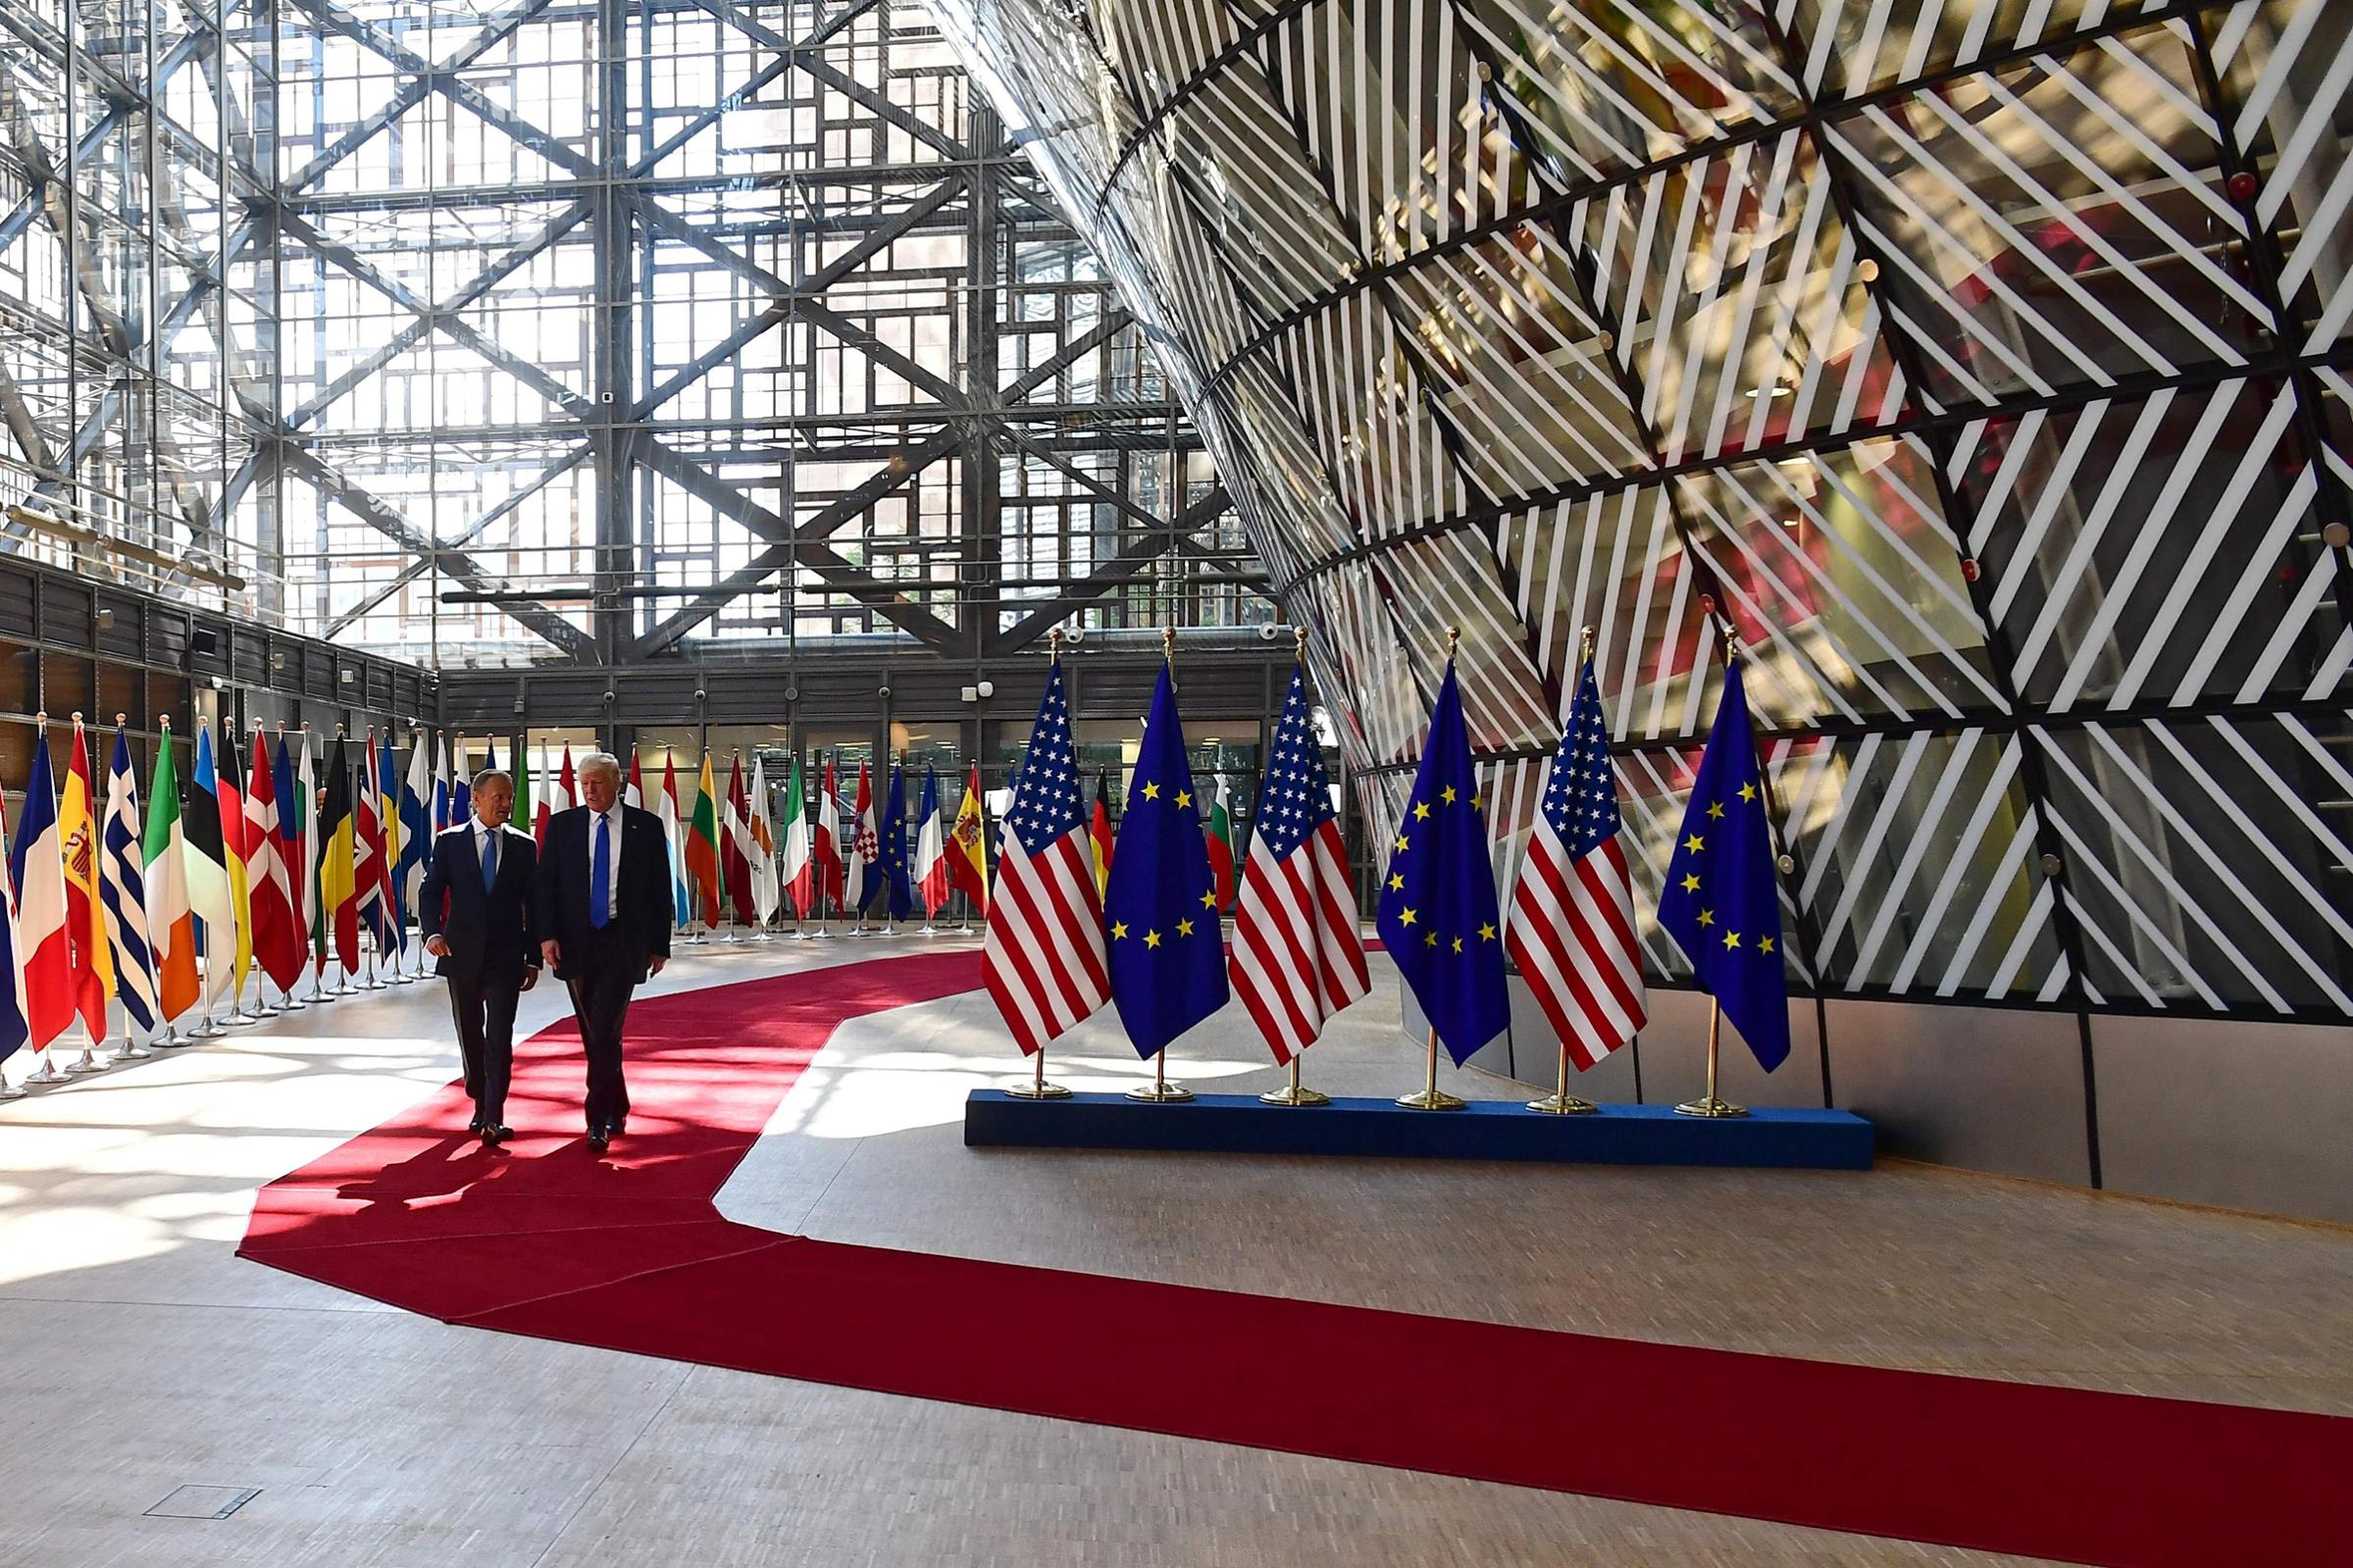 European Council President Donald Tusk speaks to President Trump after welcoming him at the E.U. headquarters, as part of the NATO meeting, in Brussels on May 25, 2017.